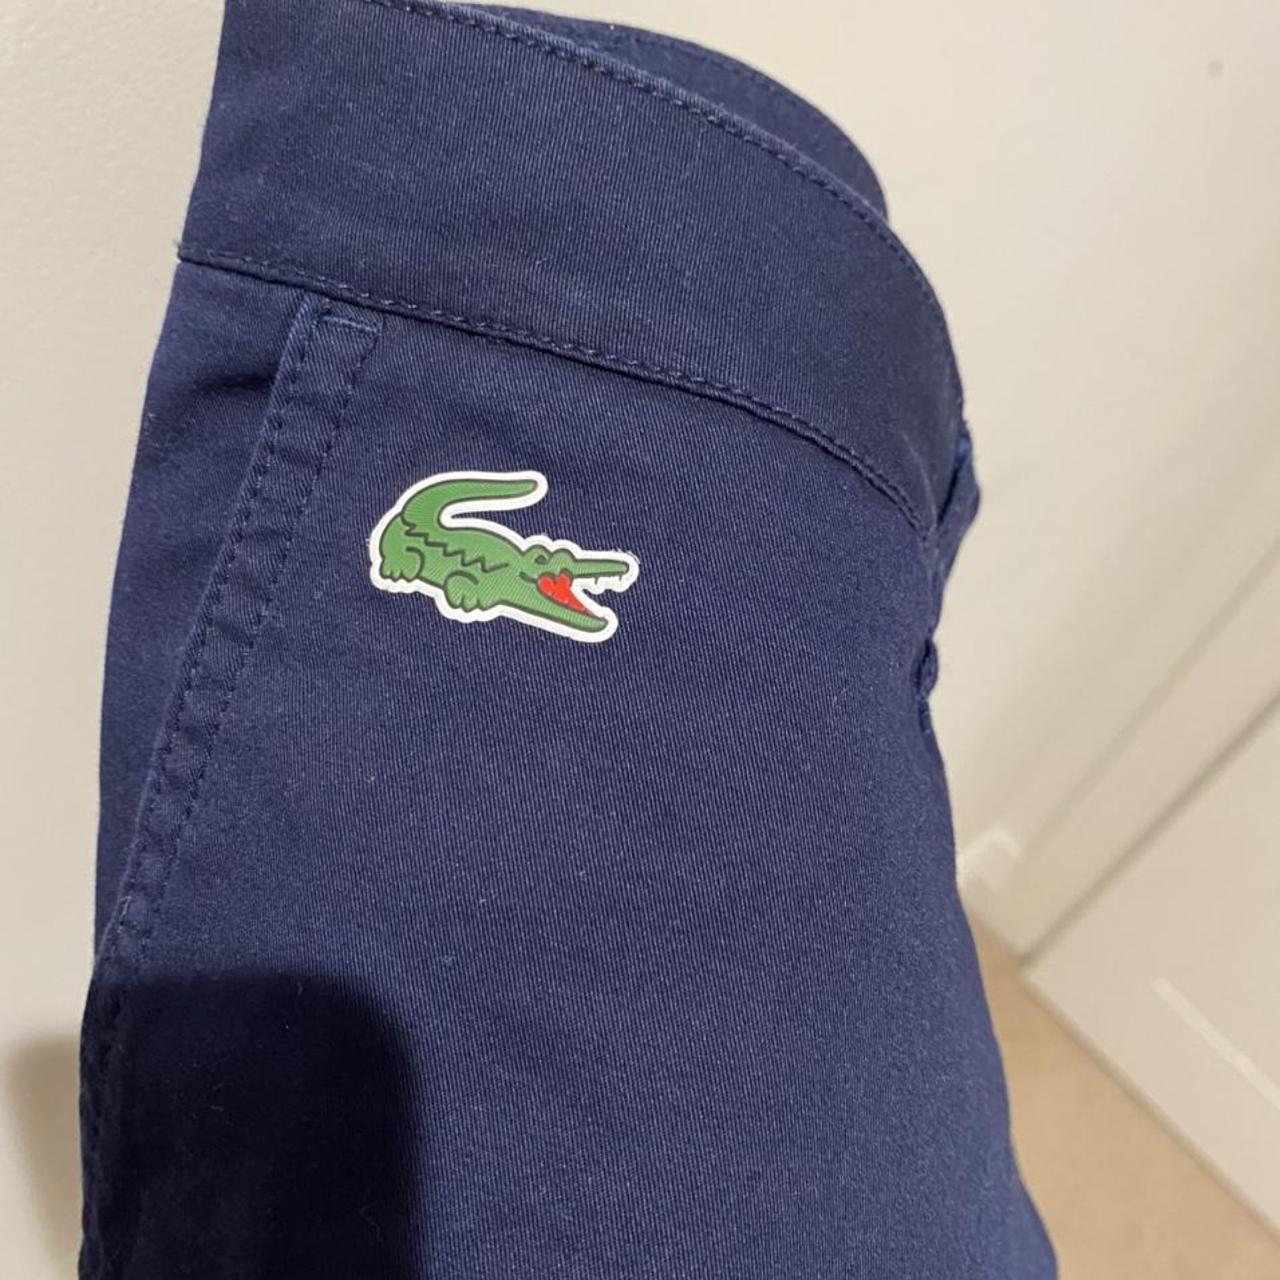 Lacoste chino shorts. Navy. Great condition. - Depop